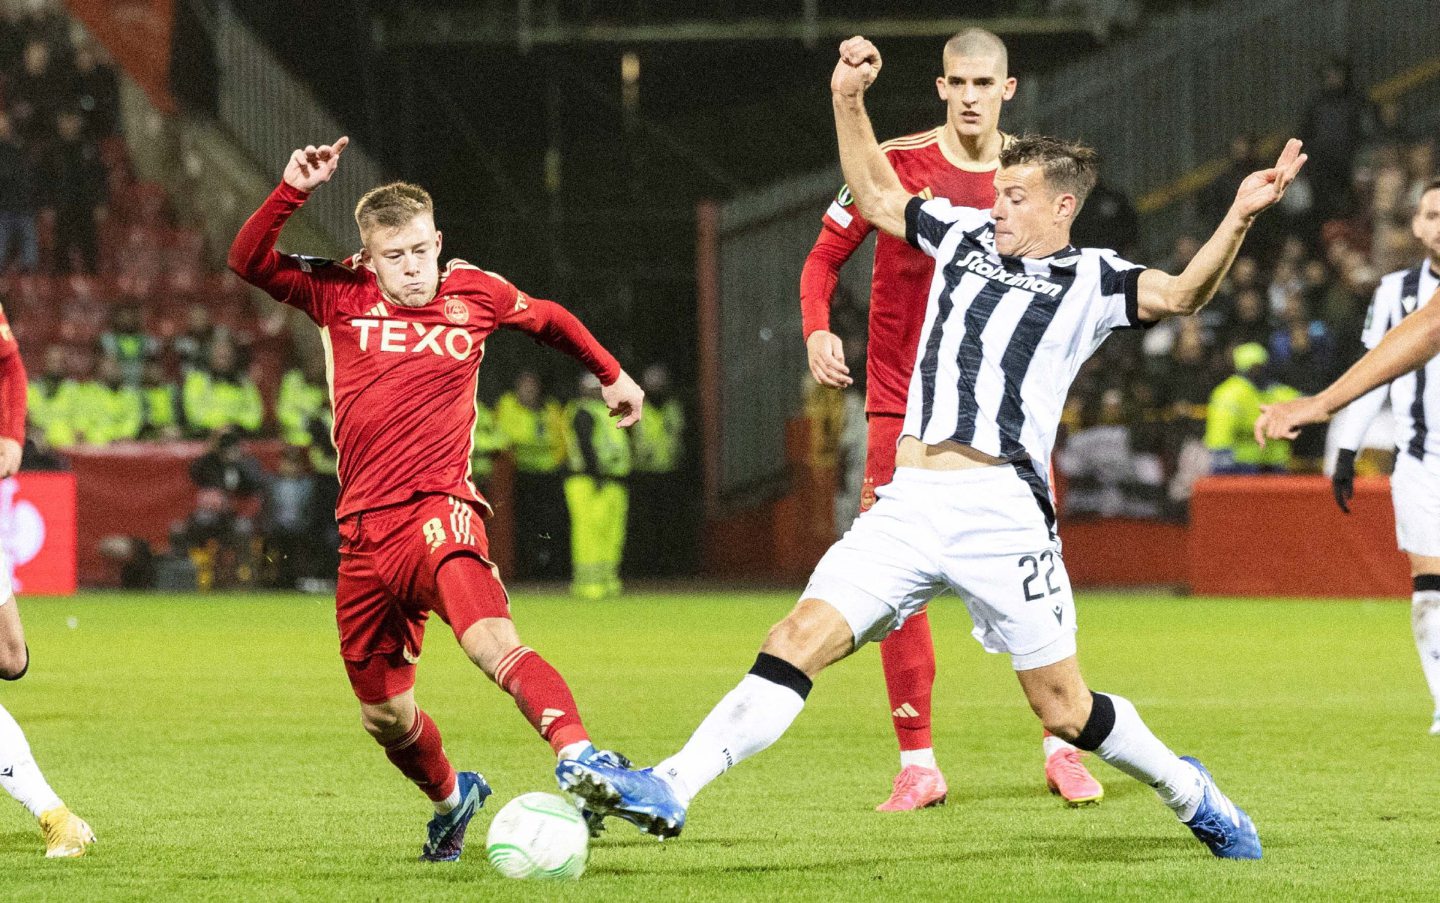 Aberdeen's Connor Barron (L) and PAOK's Stefan Schwab in action. Image: SNS.